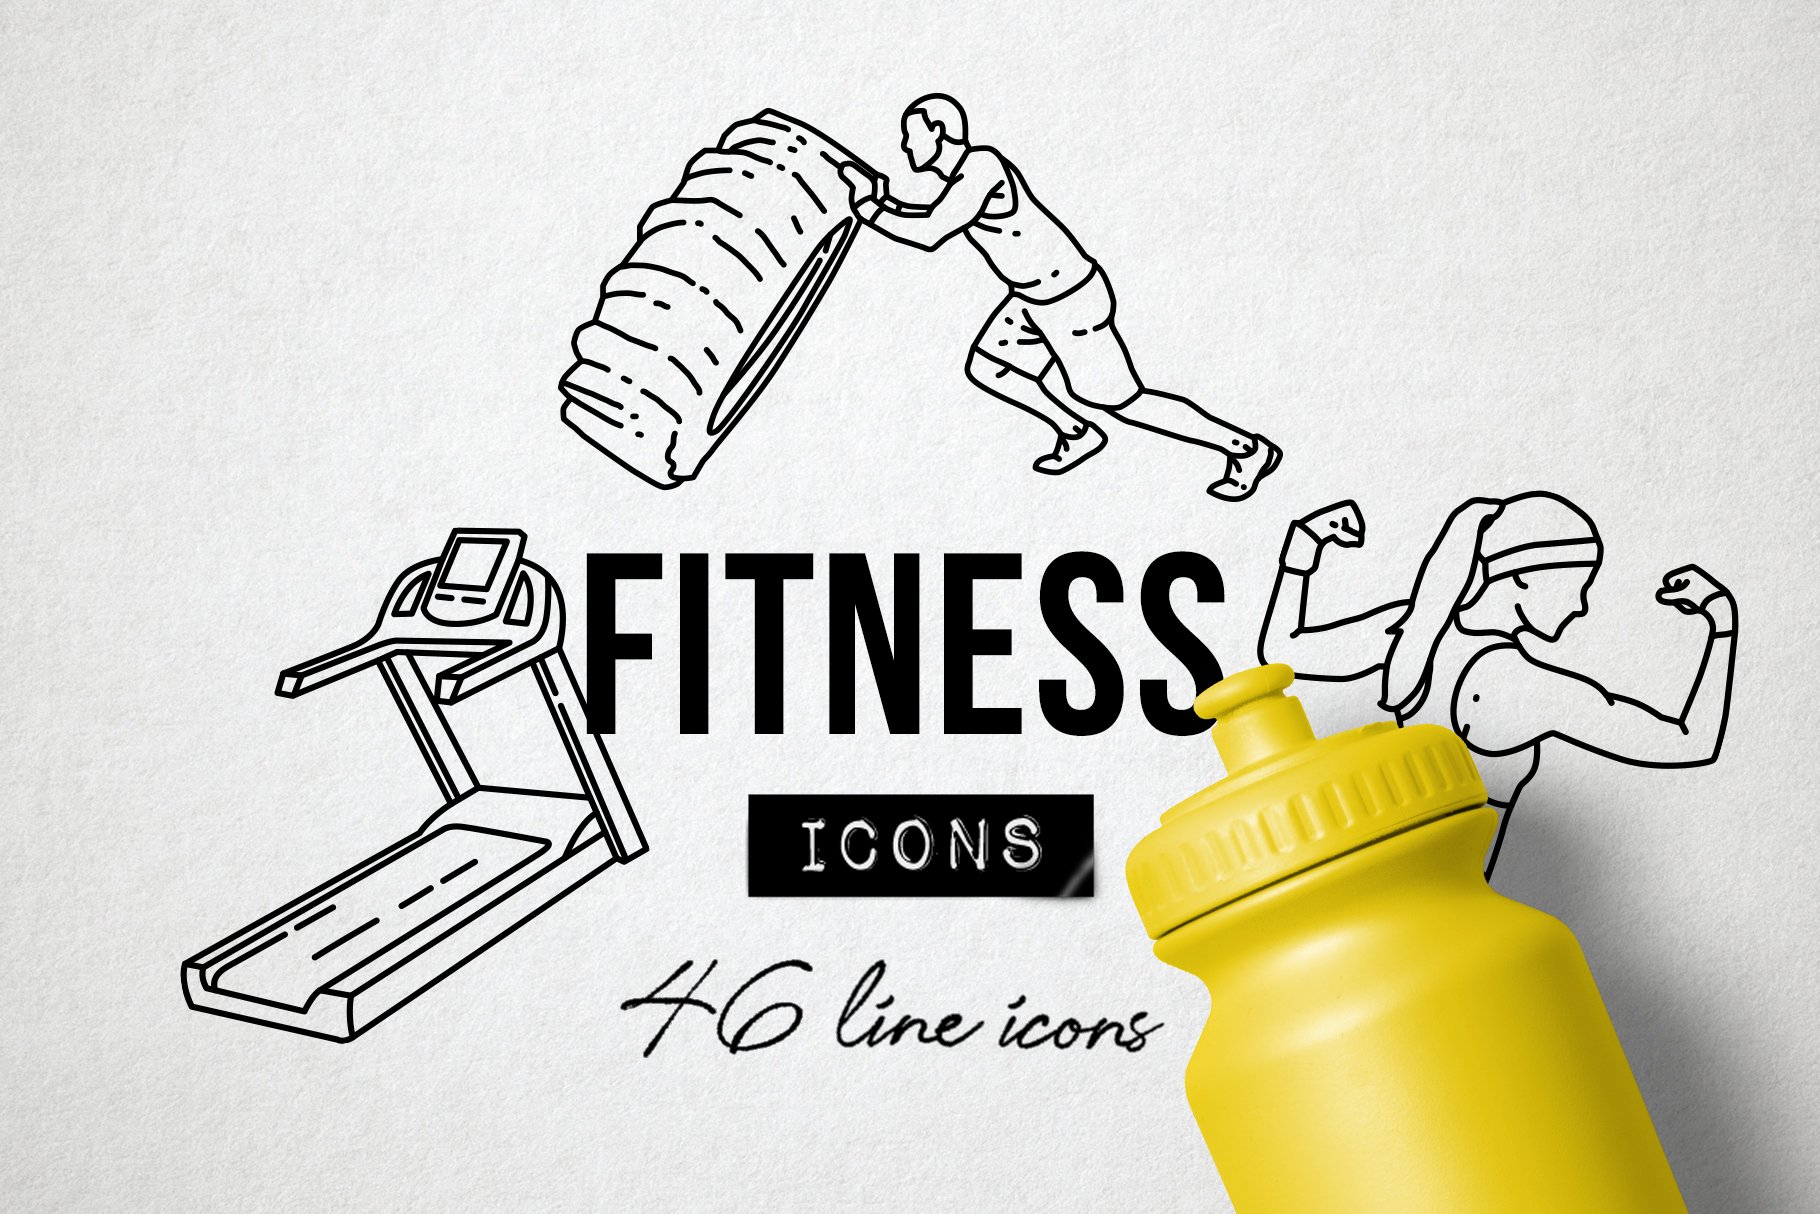 10 fitness exercise icons 139